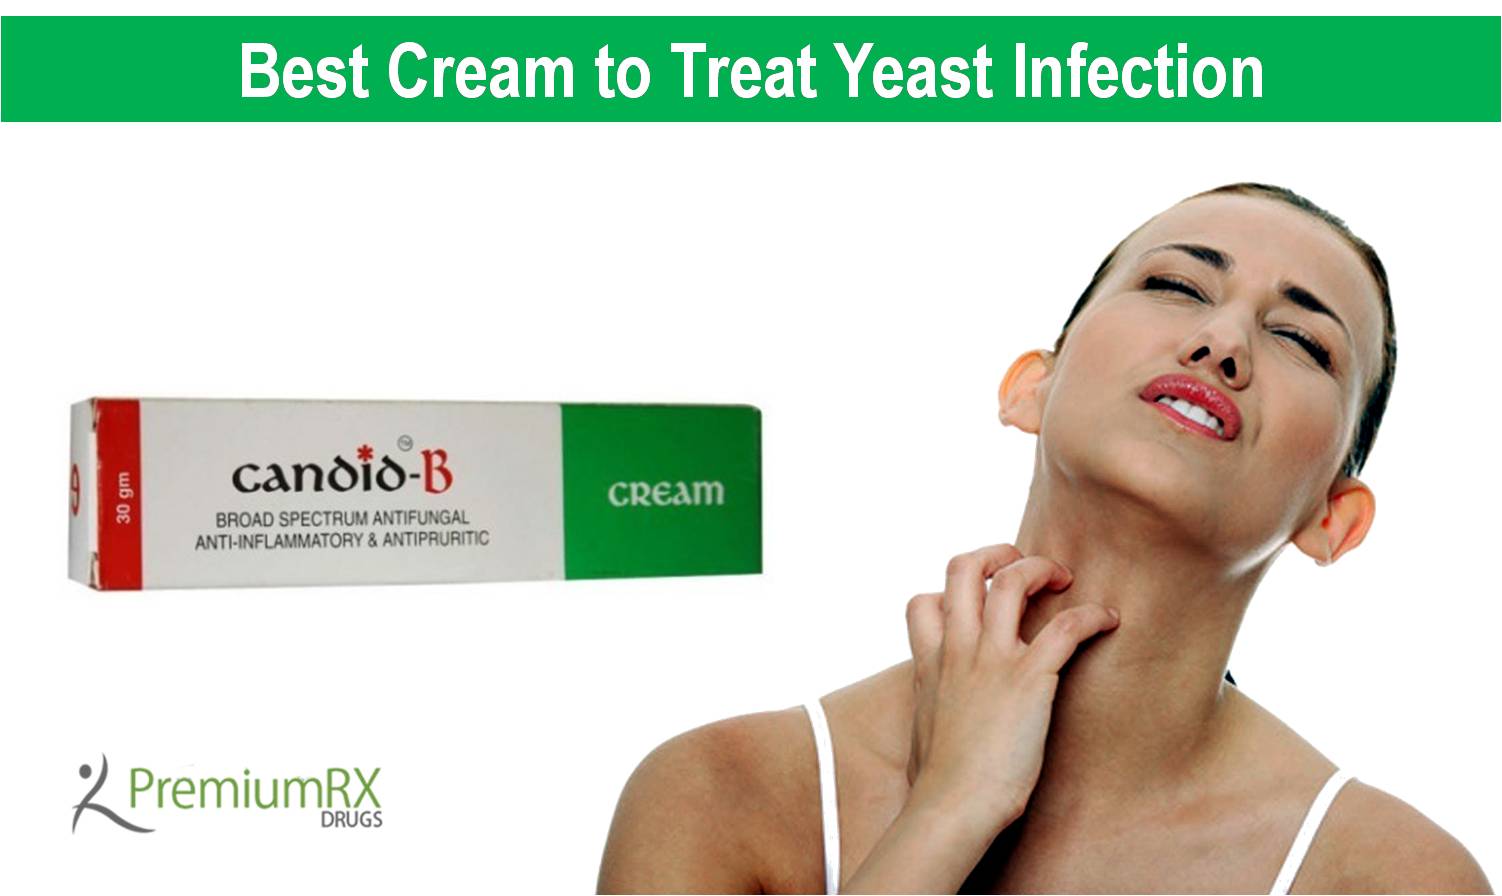 How to Apply Candid B Cream For Yeast Infection